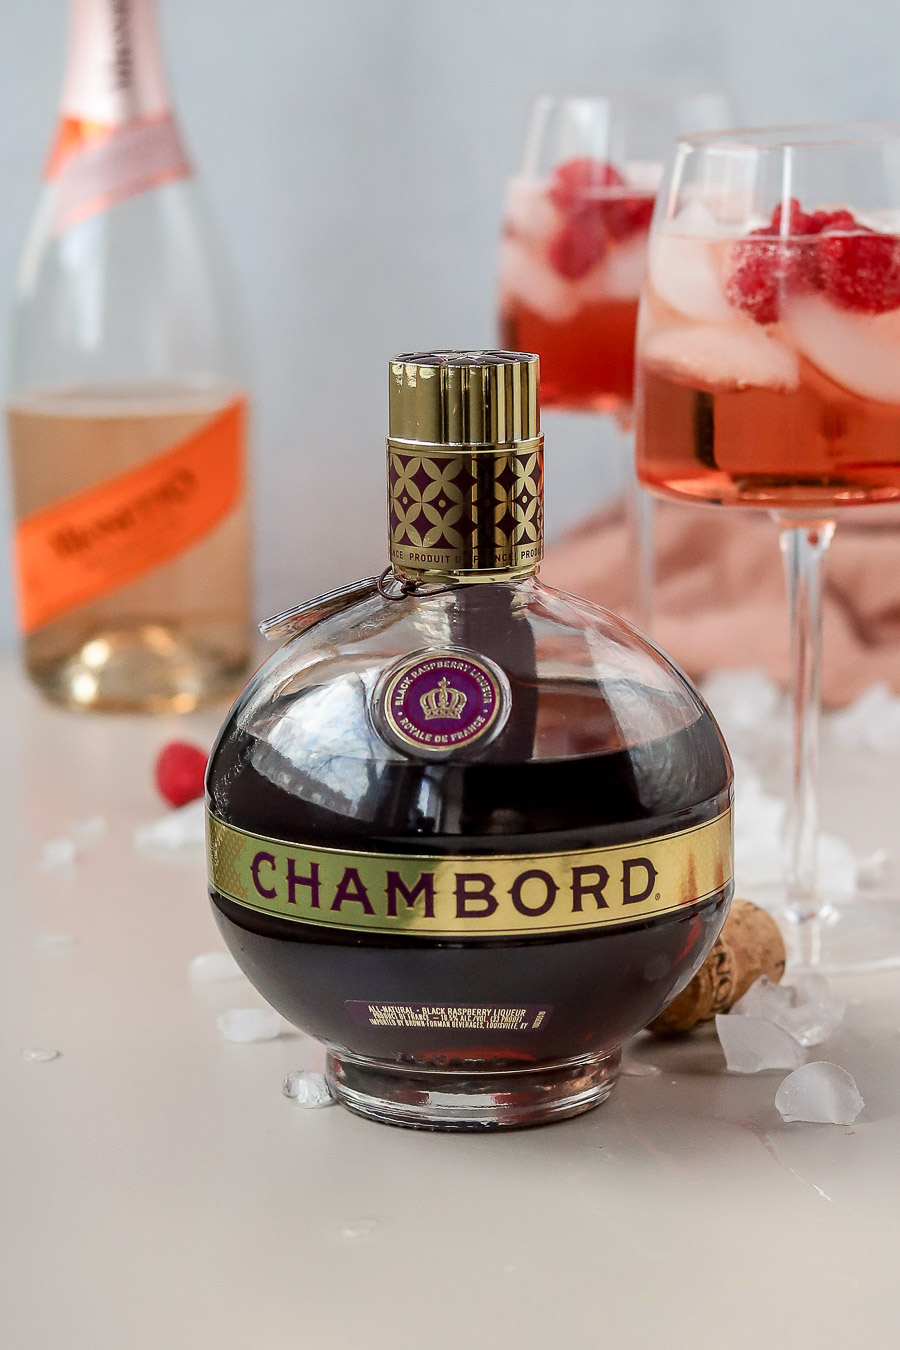 what is chambord?